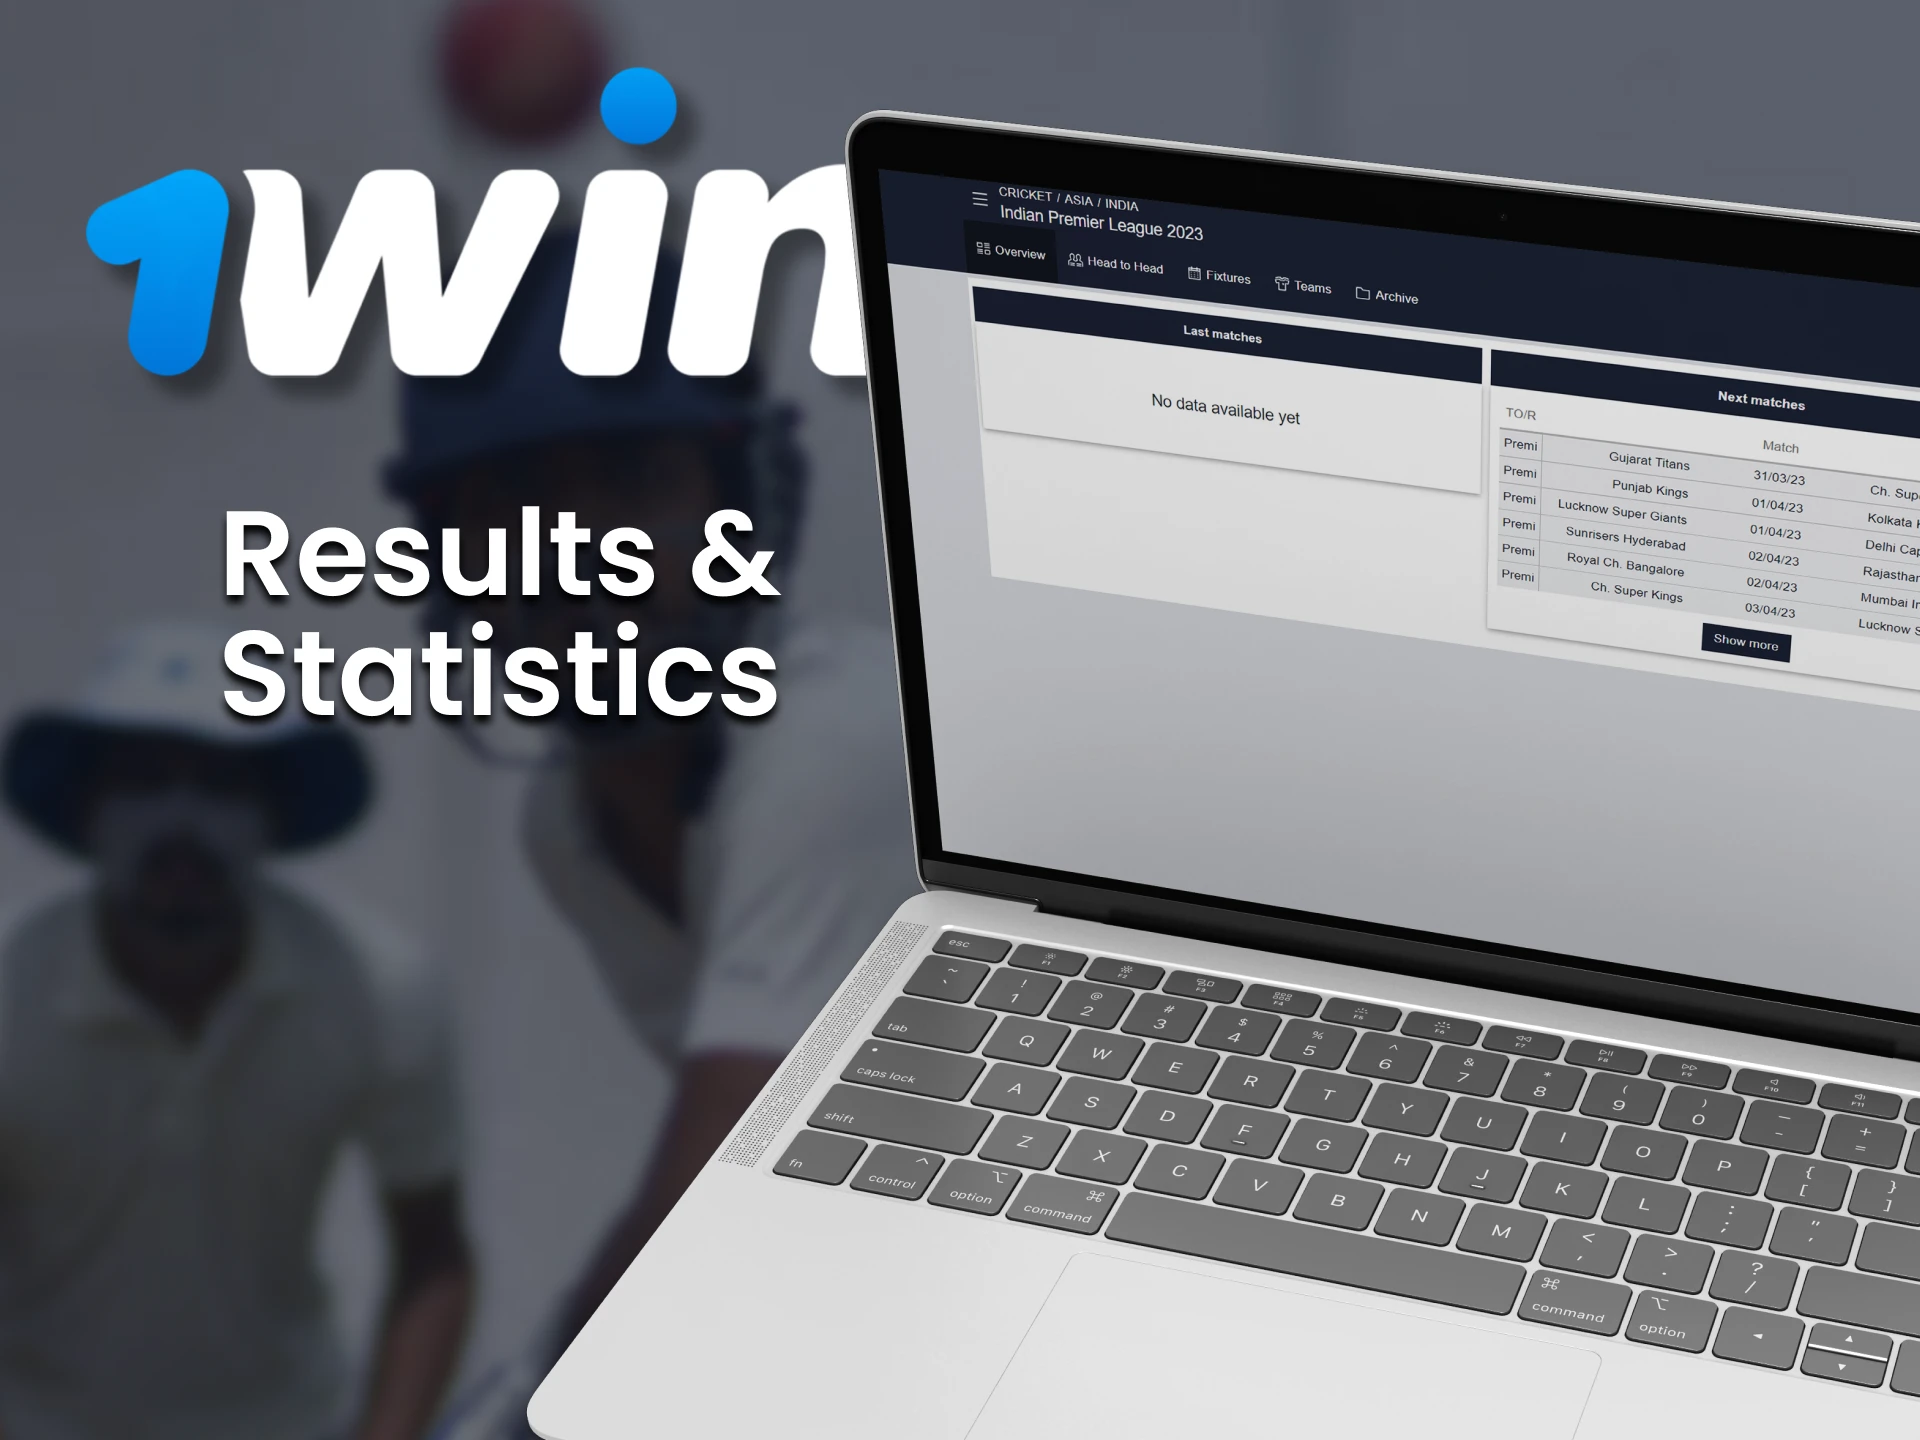 At 1win you can always find statistics and match results.